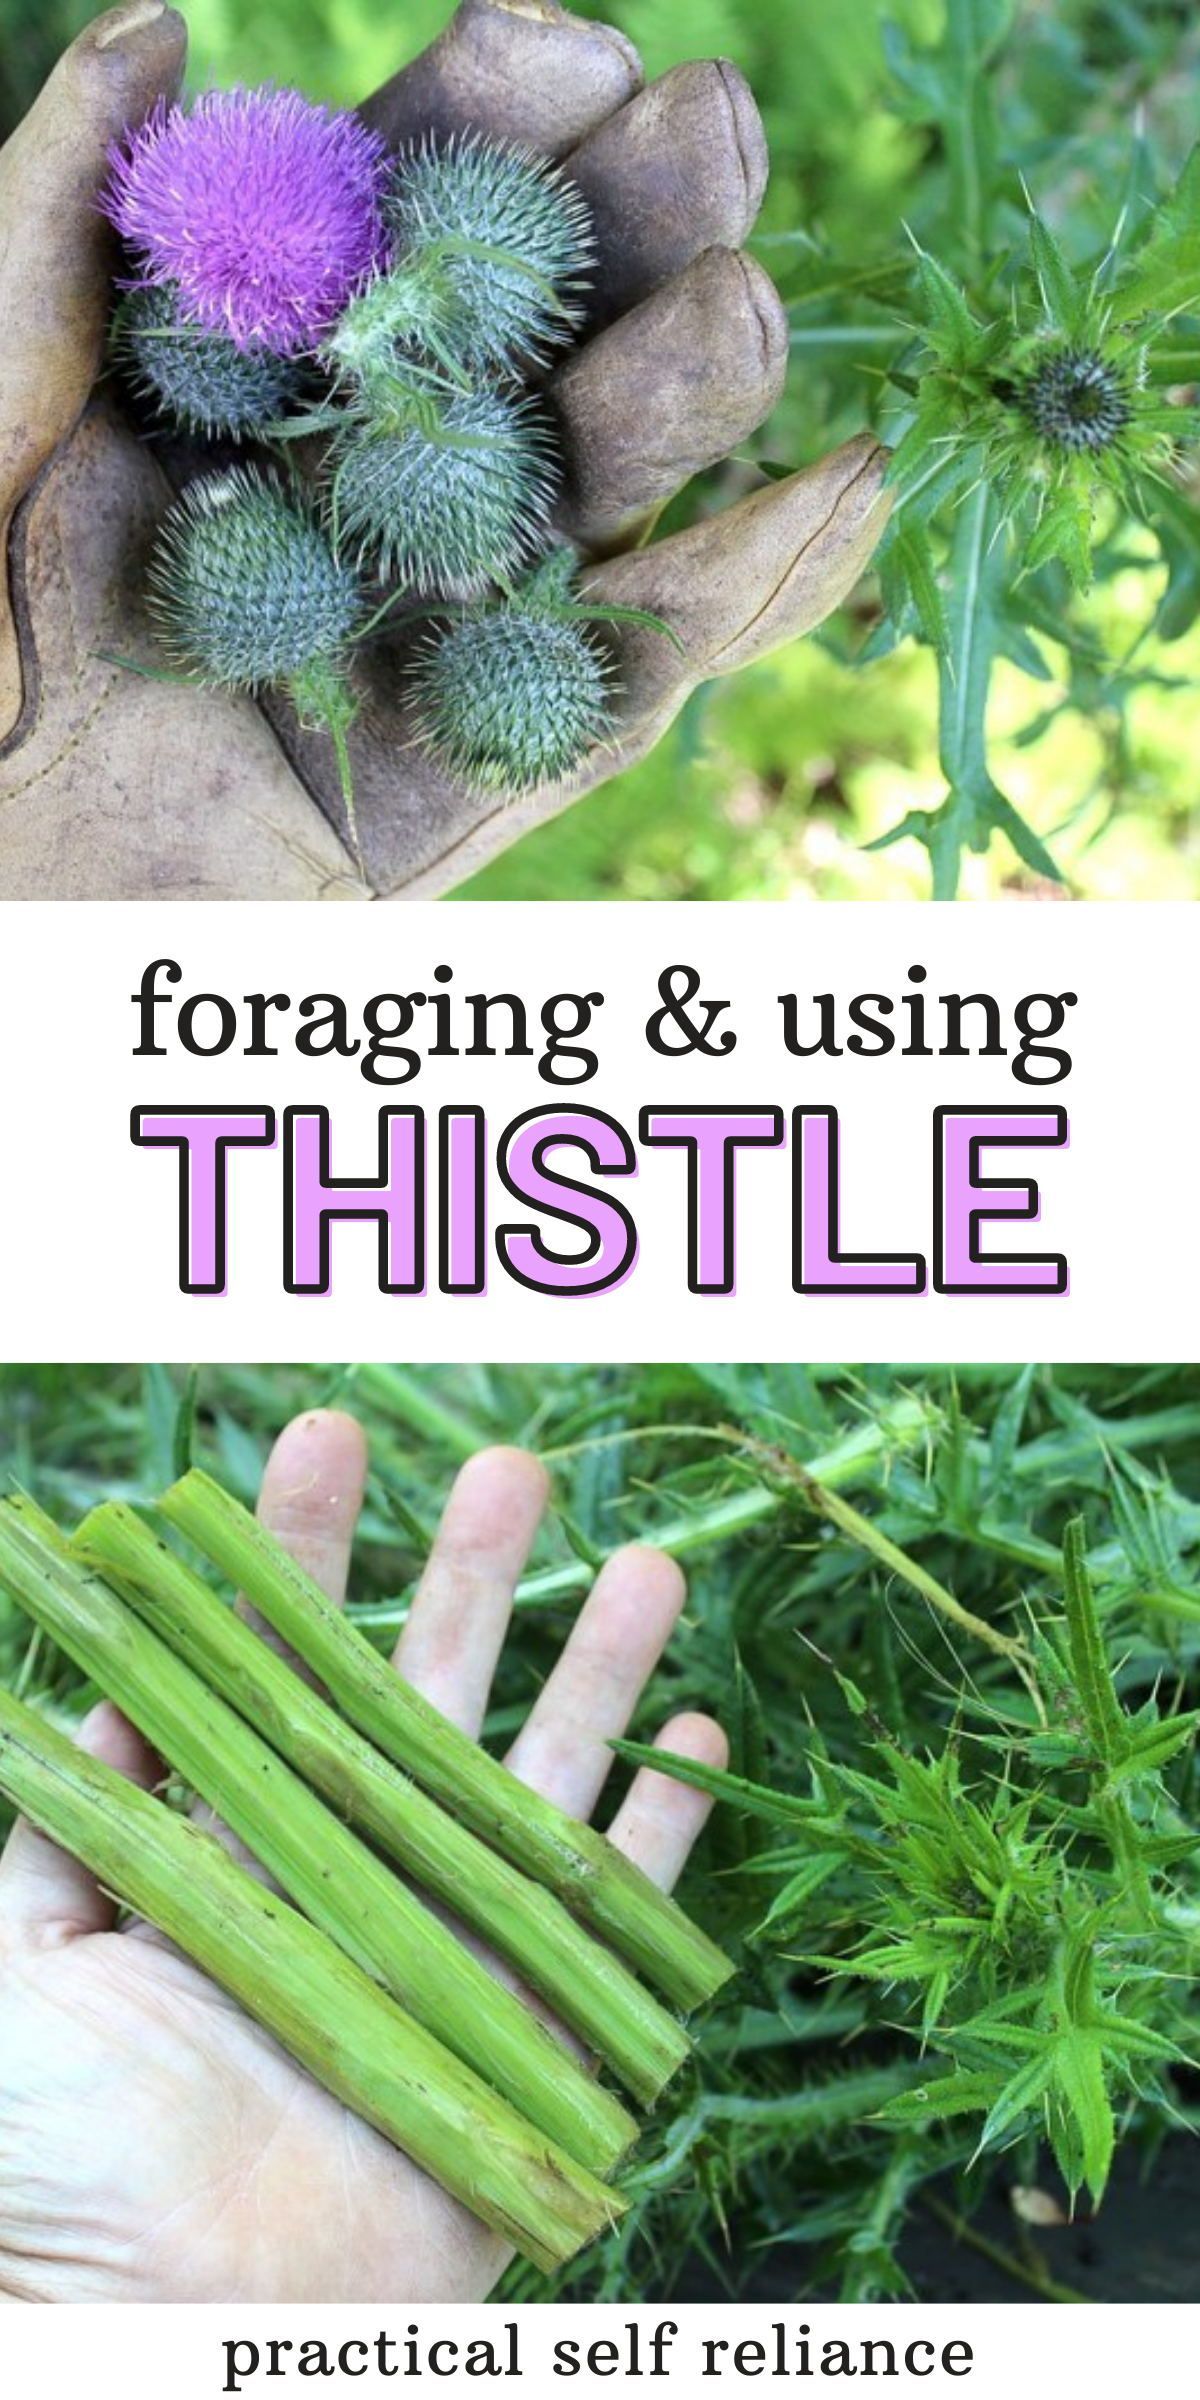 Foraging Thistle: Summer Foraging Edible Thistle